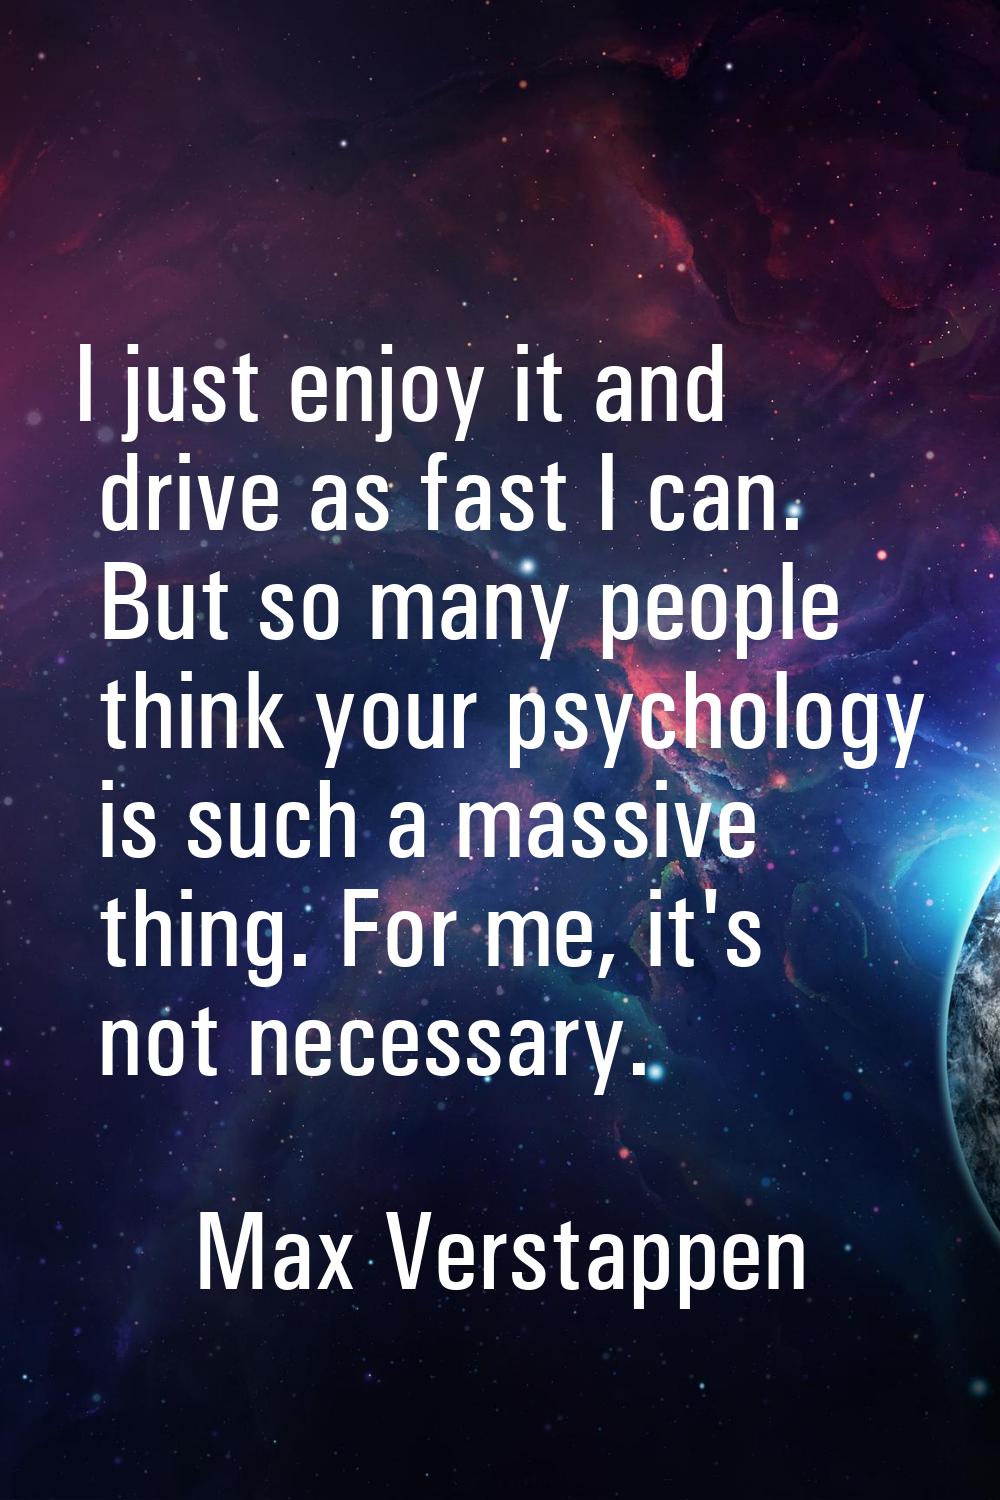 I just enjoy it and drive as fast I can. But so many people think your psychology is such a massive